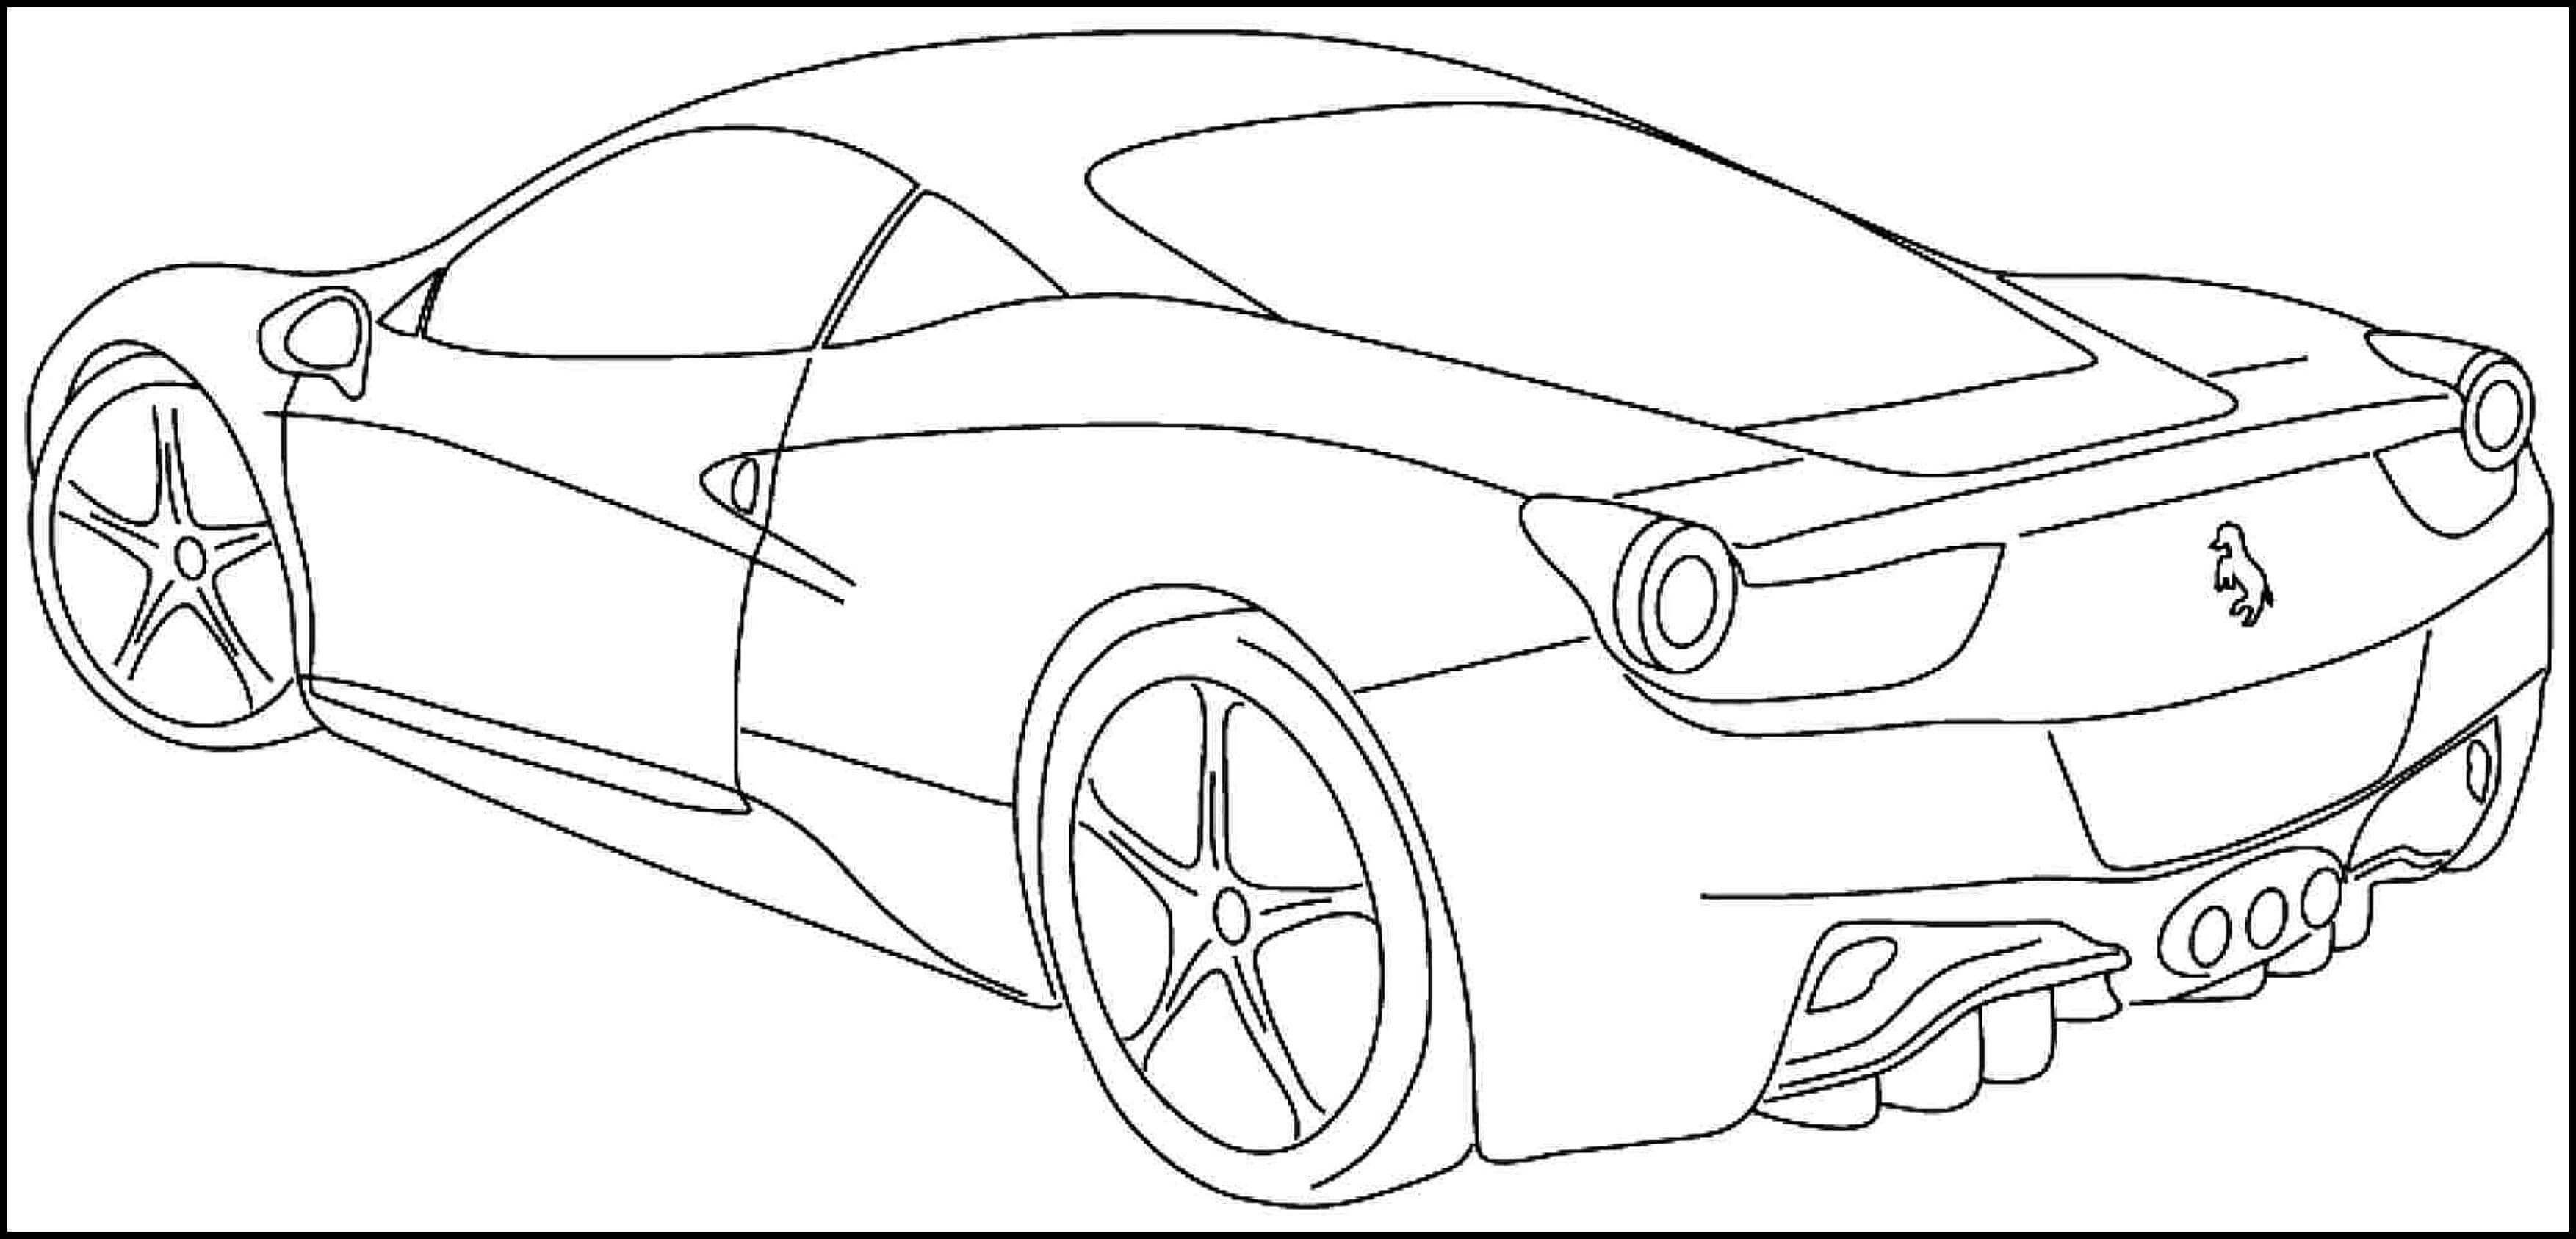 Coloring Pages For Boys Sports Racing
 Printable sports car coloring pages for kids & teens